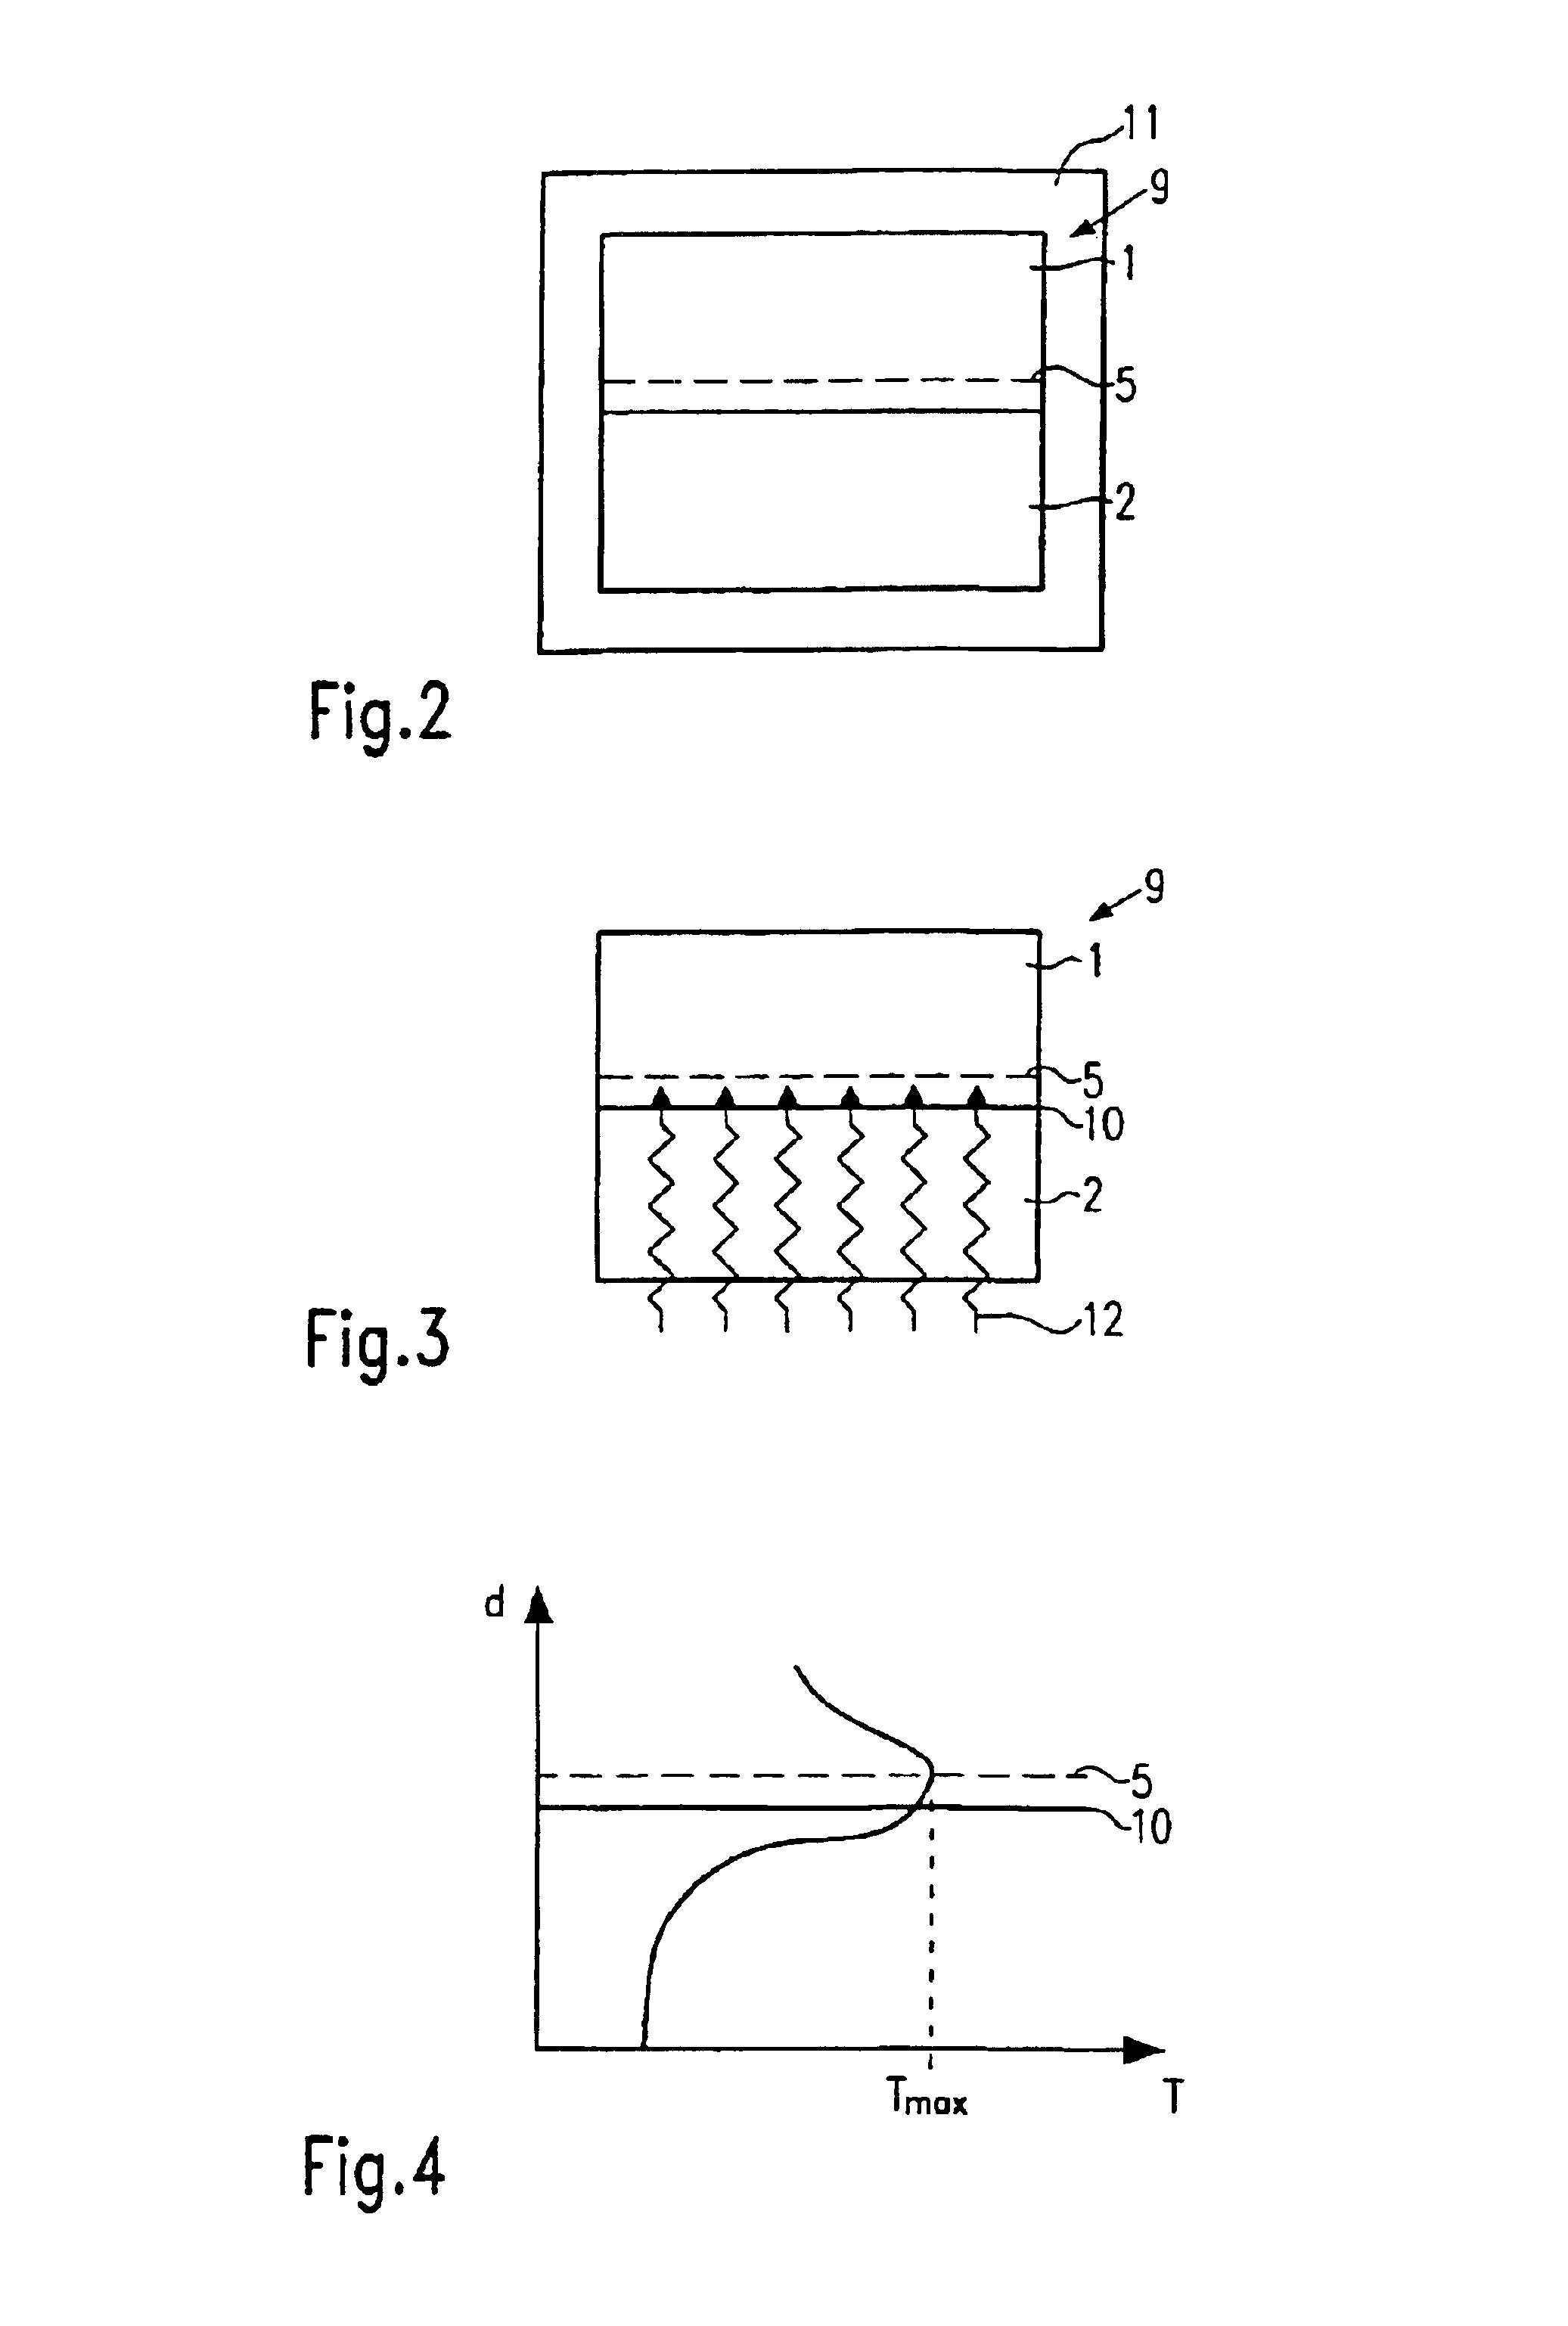 Method of manufacturing a wafer